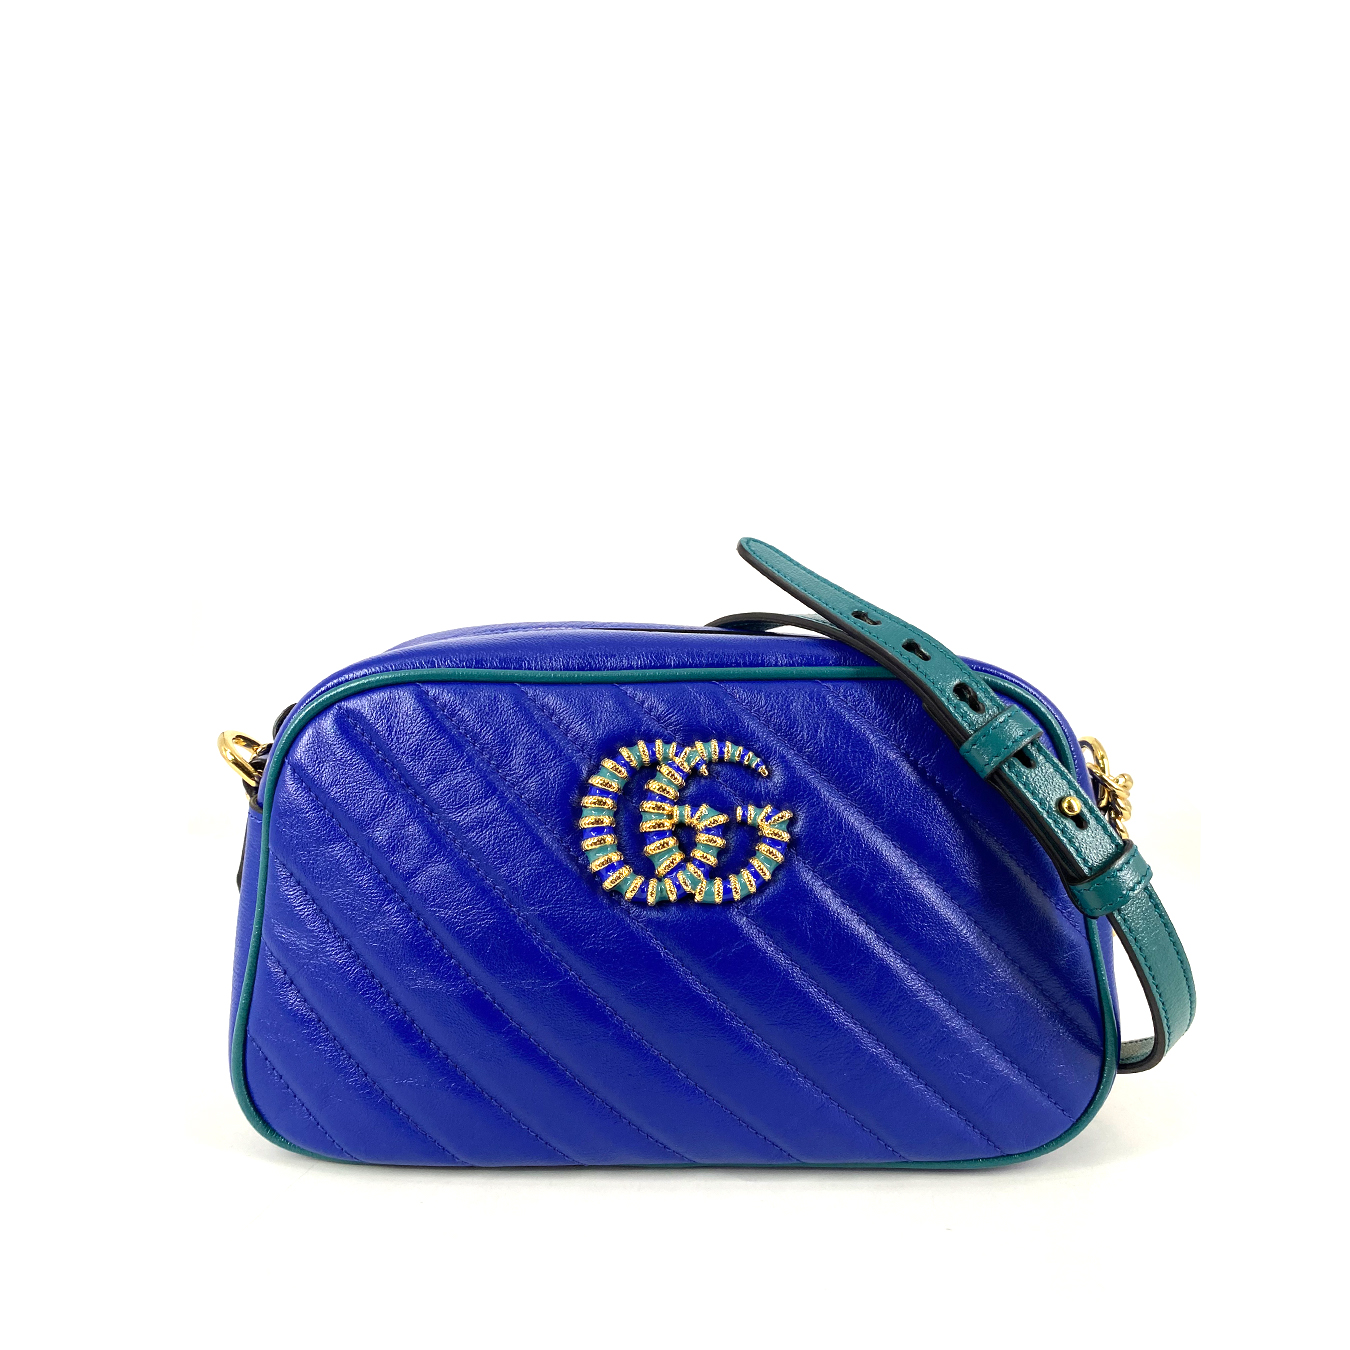 Gucci Marmont Matelase Leather Camera in Blue